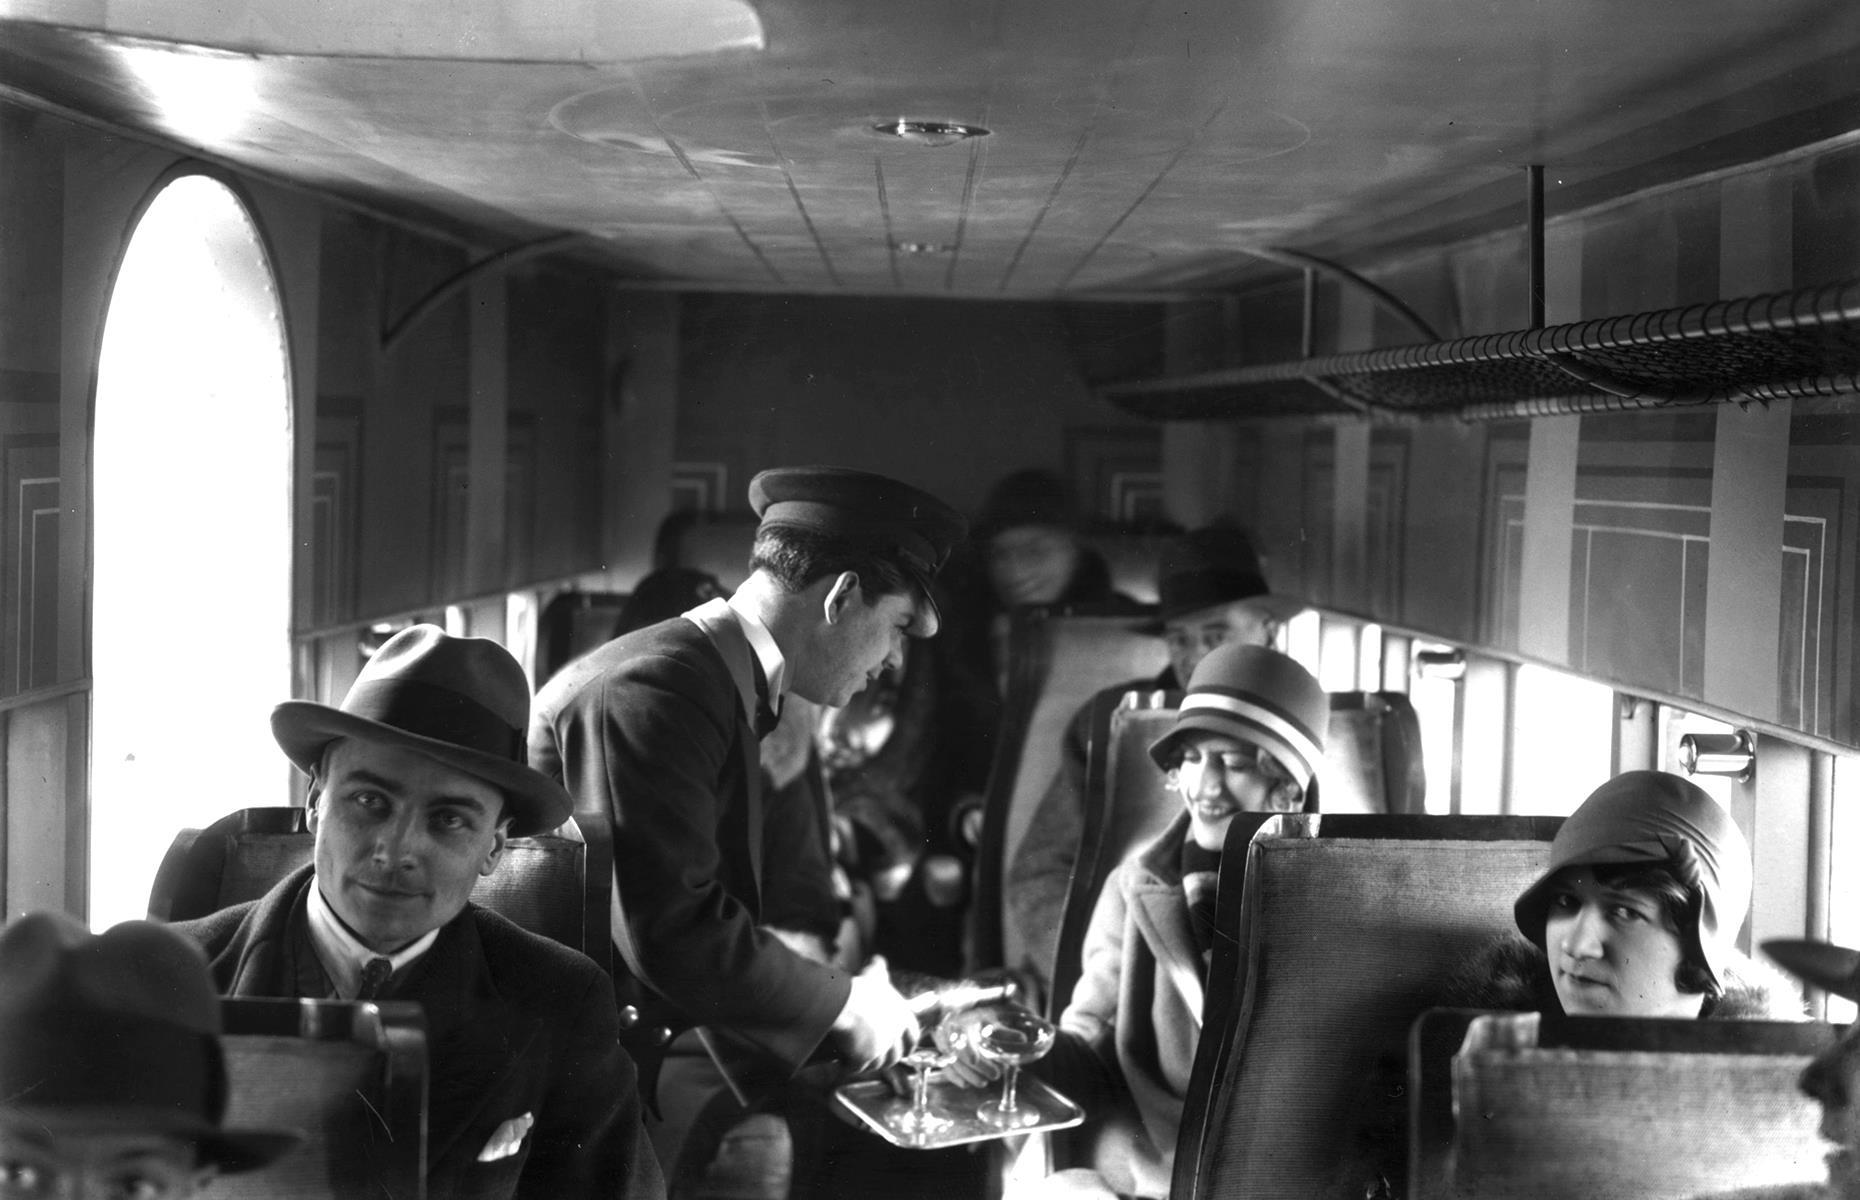 Life onboard a 1920s aircraft was very different from that of the modern day. Flights were a lavish affair reserved only for the richest members of society. Passengers had their every need attended to and were waited on with fine food and drink. However, the ride itself wouldn't have been so comfortable. Planes traveled at a much lower altitude, so passengers were subjected to lots of noise, turbulence and long journey times.